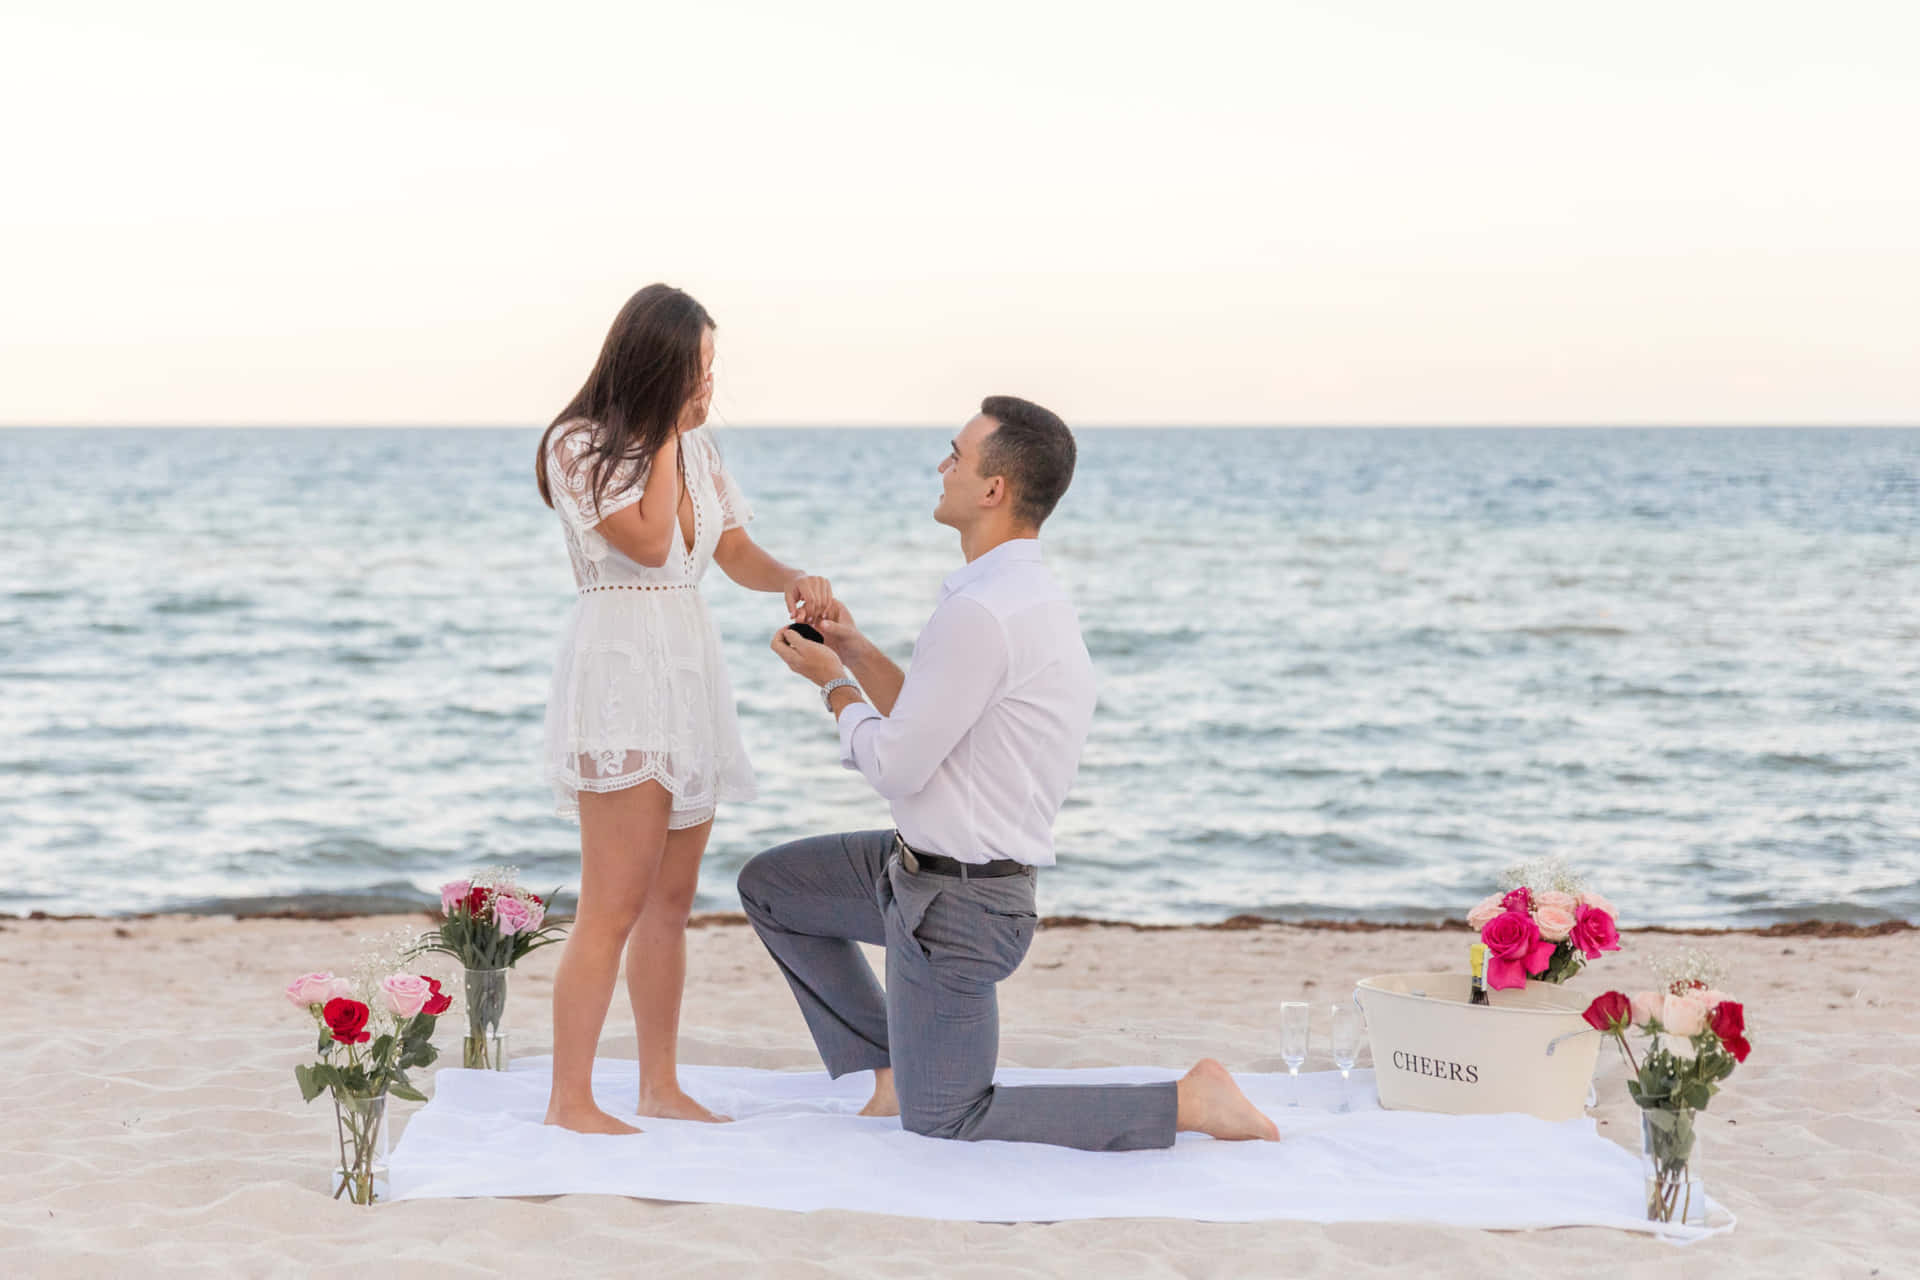 Can't help but be mesmerized by this beautiful proposal moment